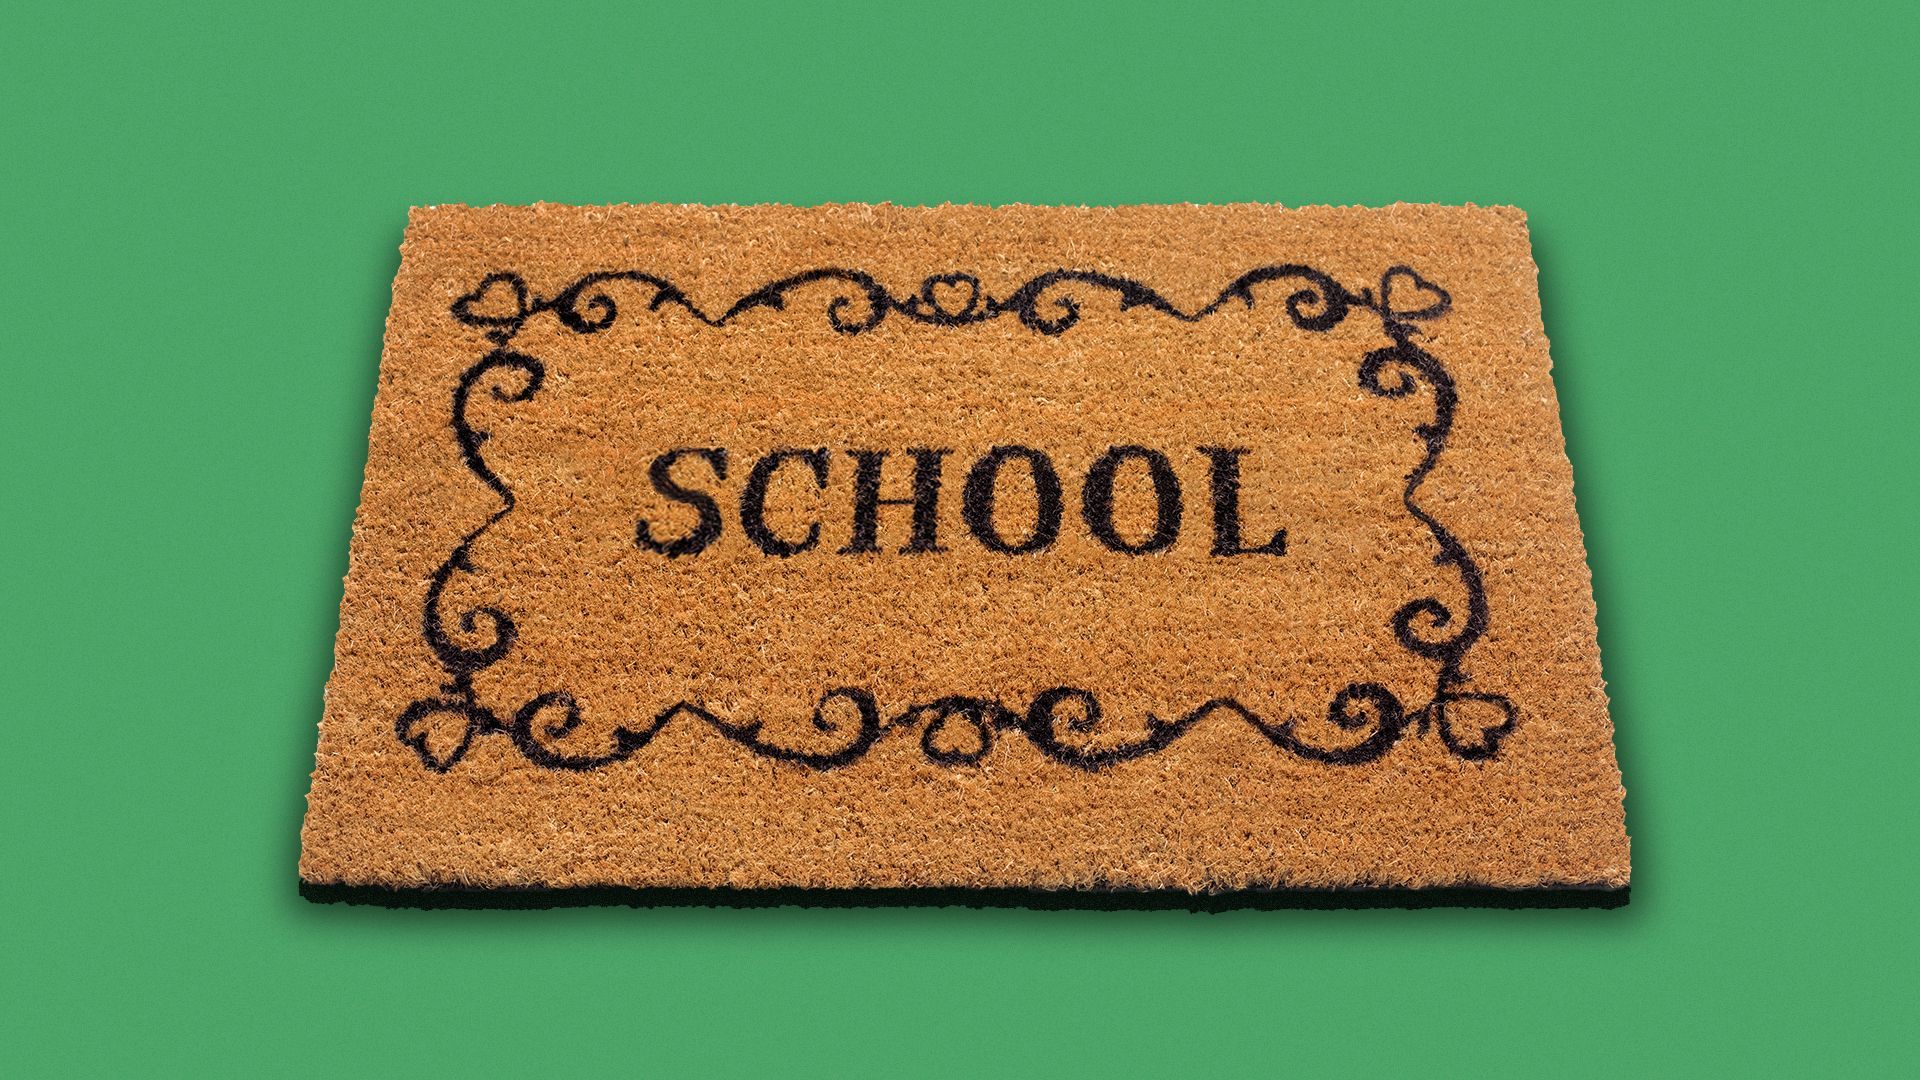 Illustration of a welcome mat with the word "school" written on the front